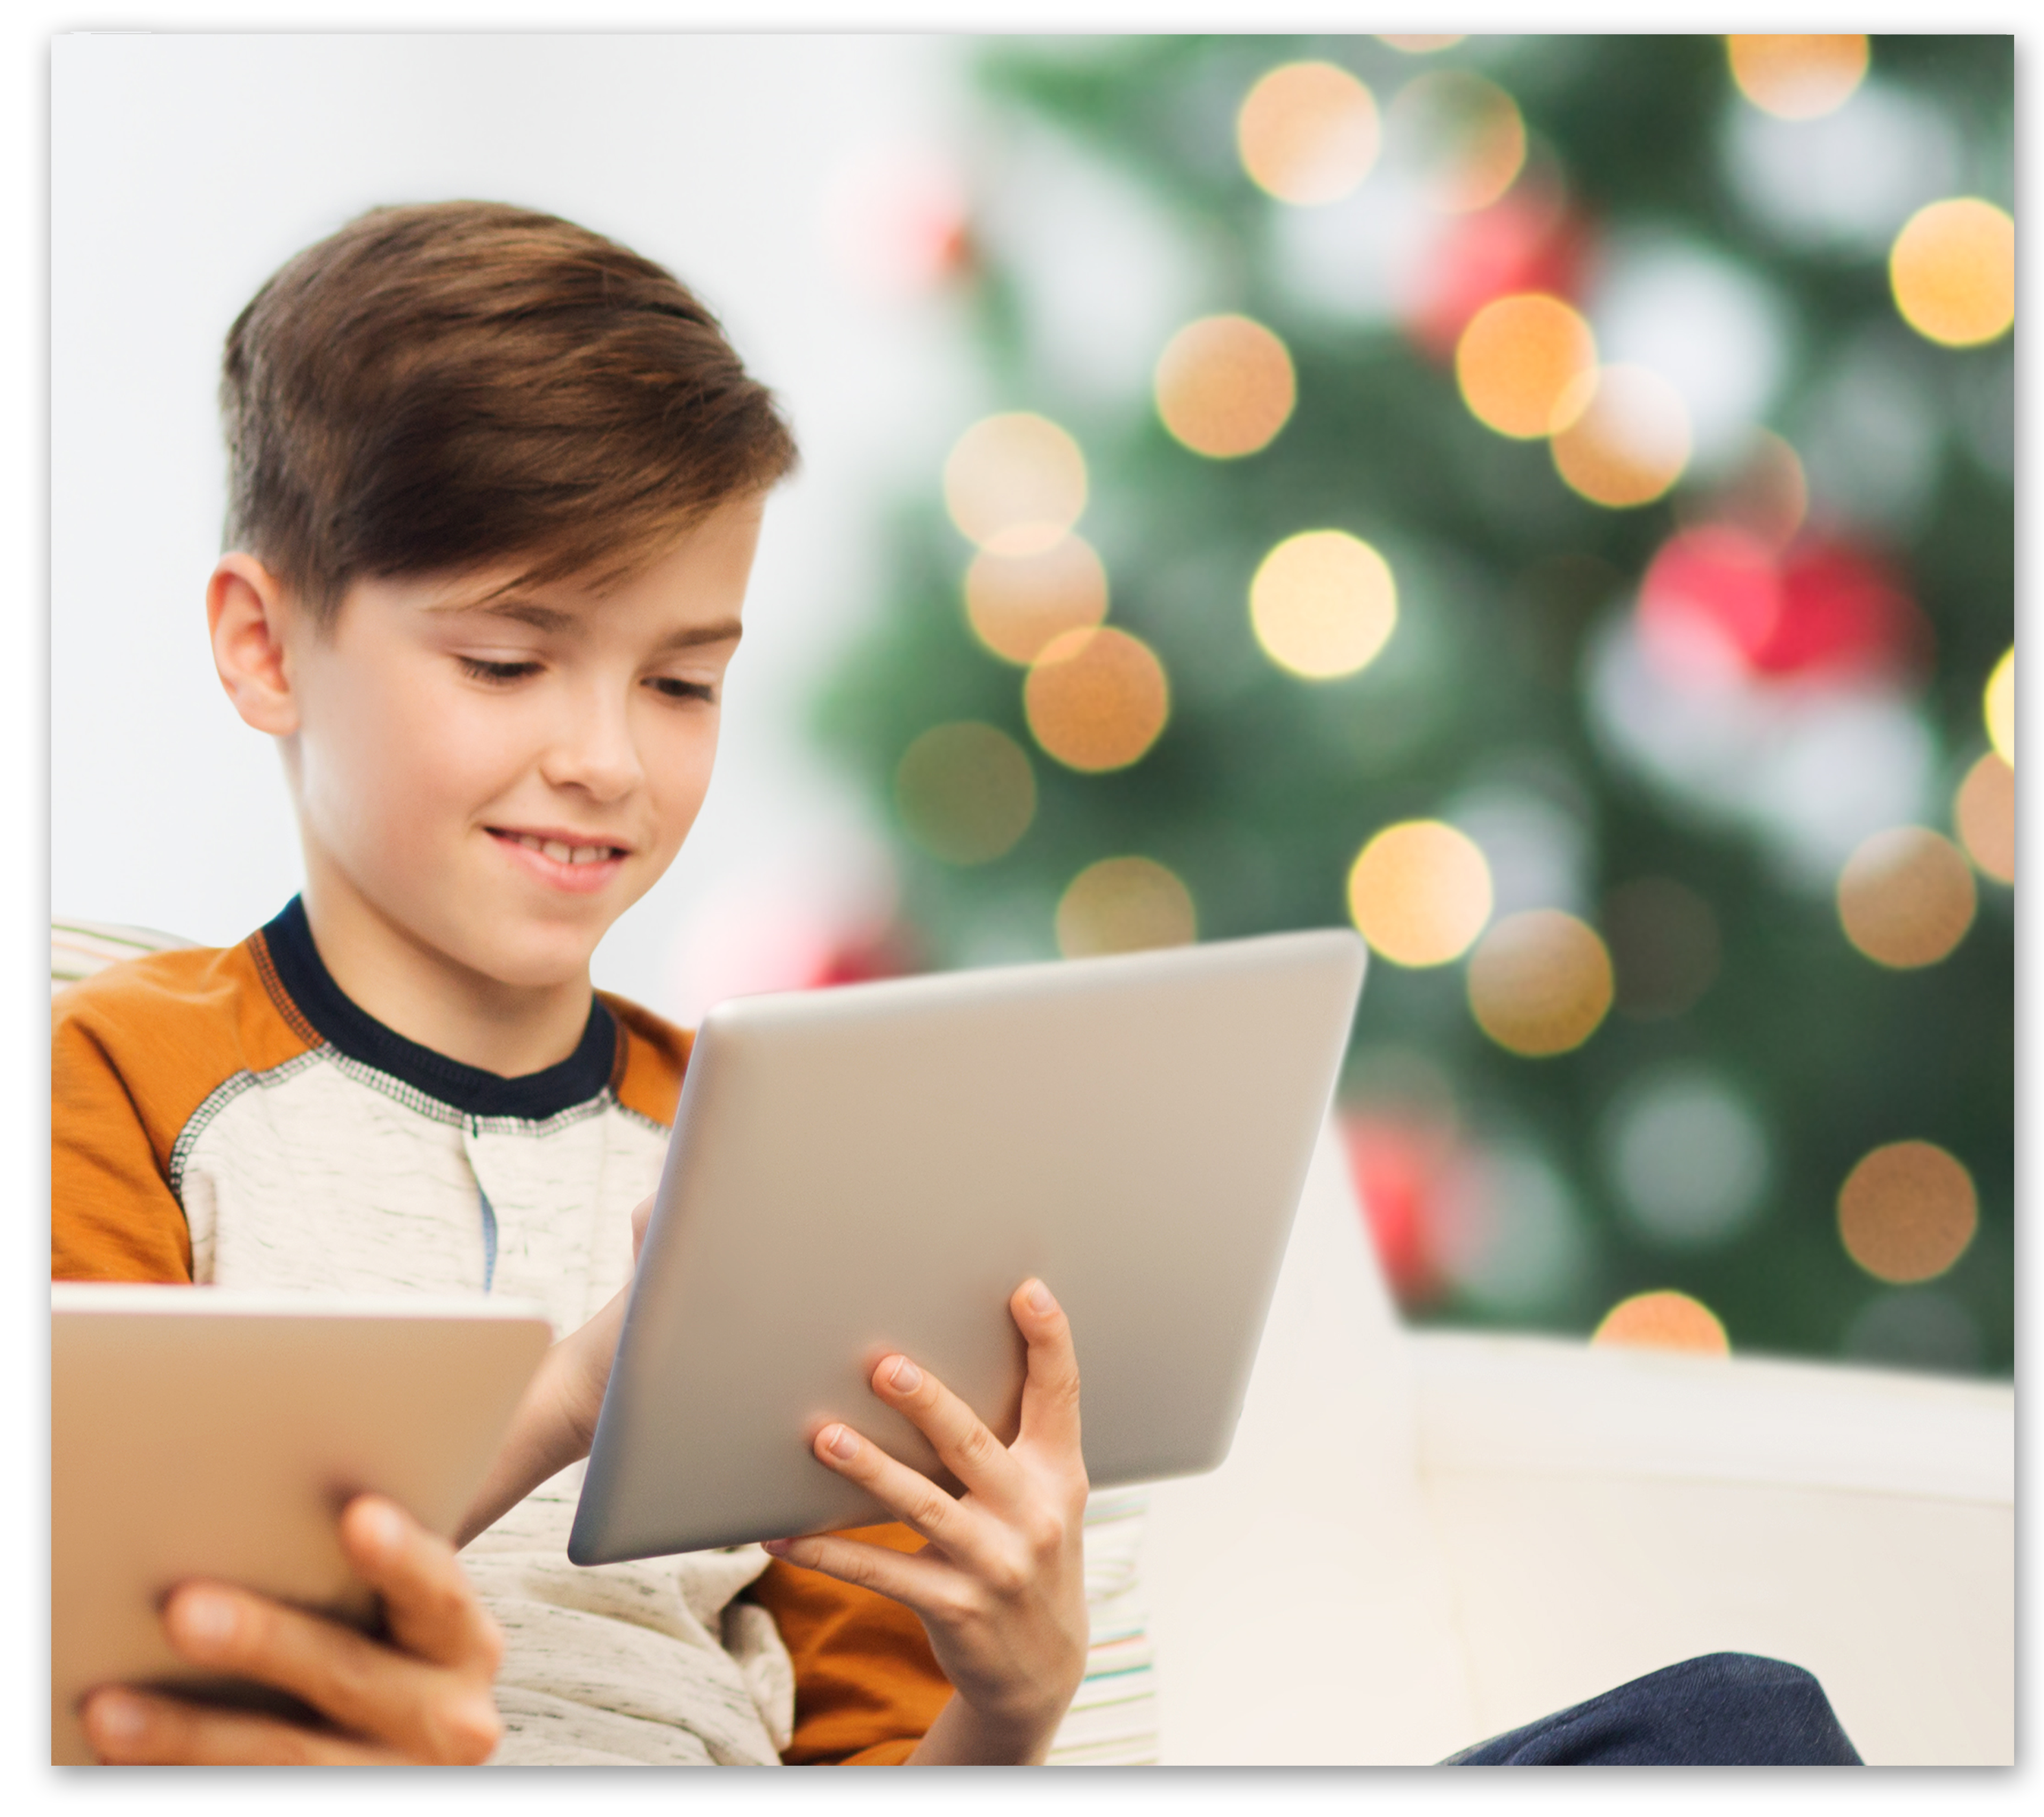 Boy holding laptop in front of christmas tree